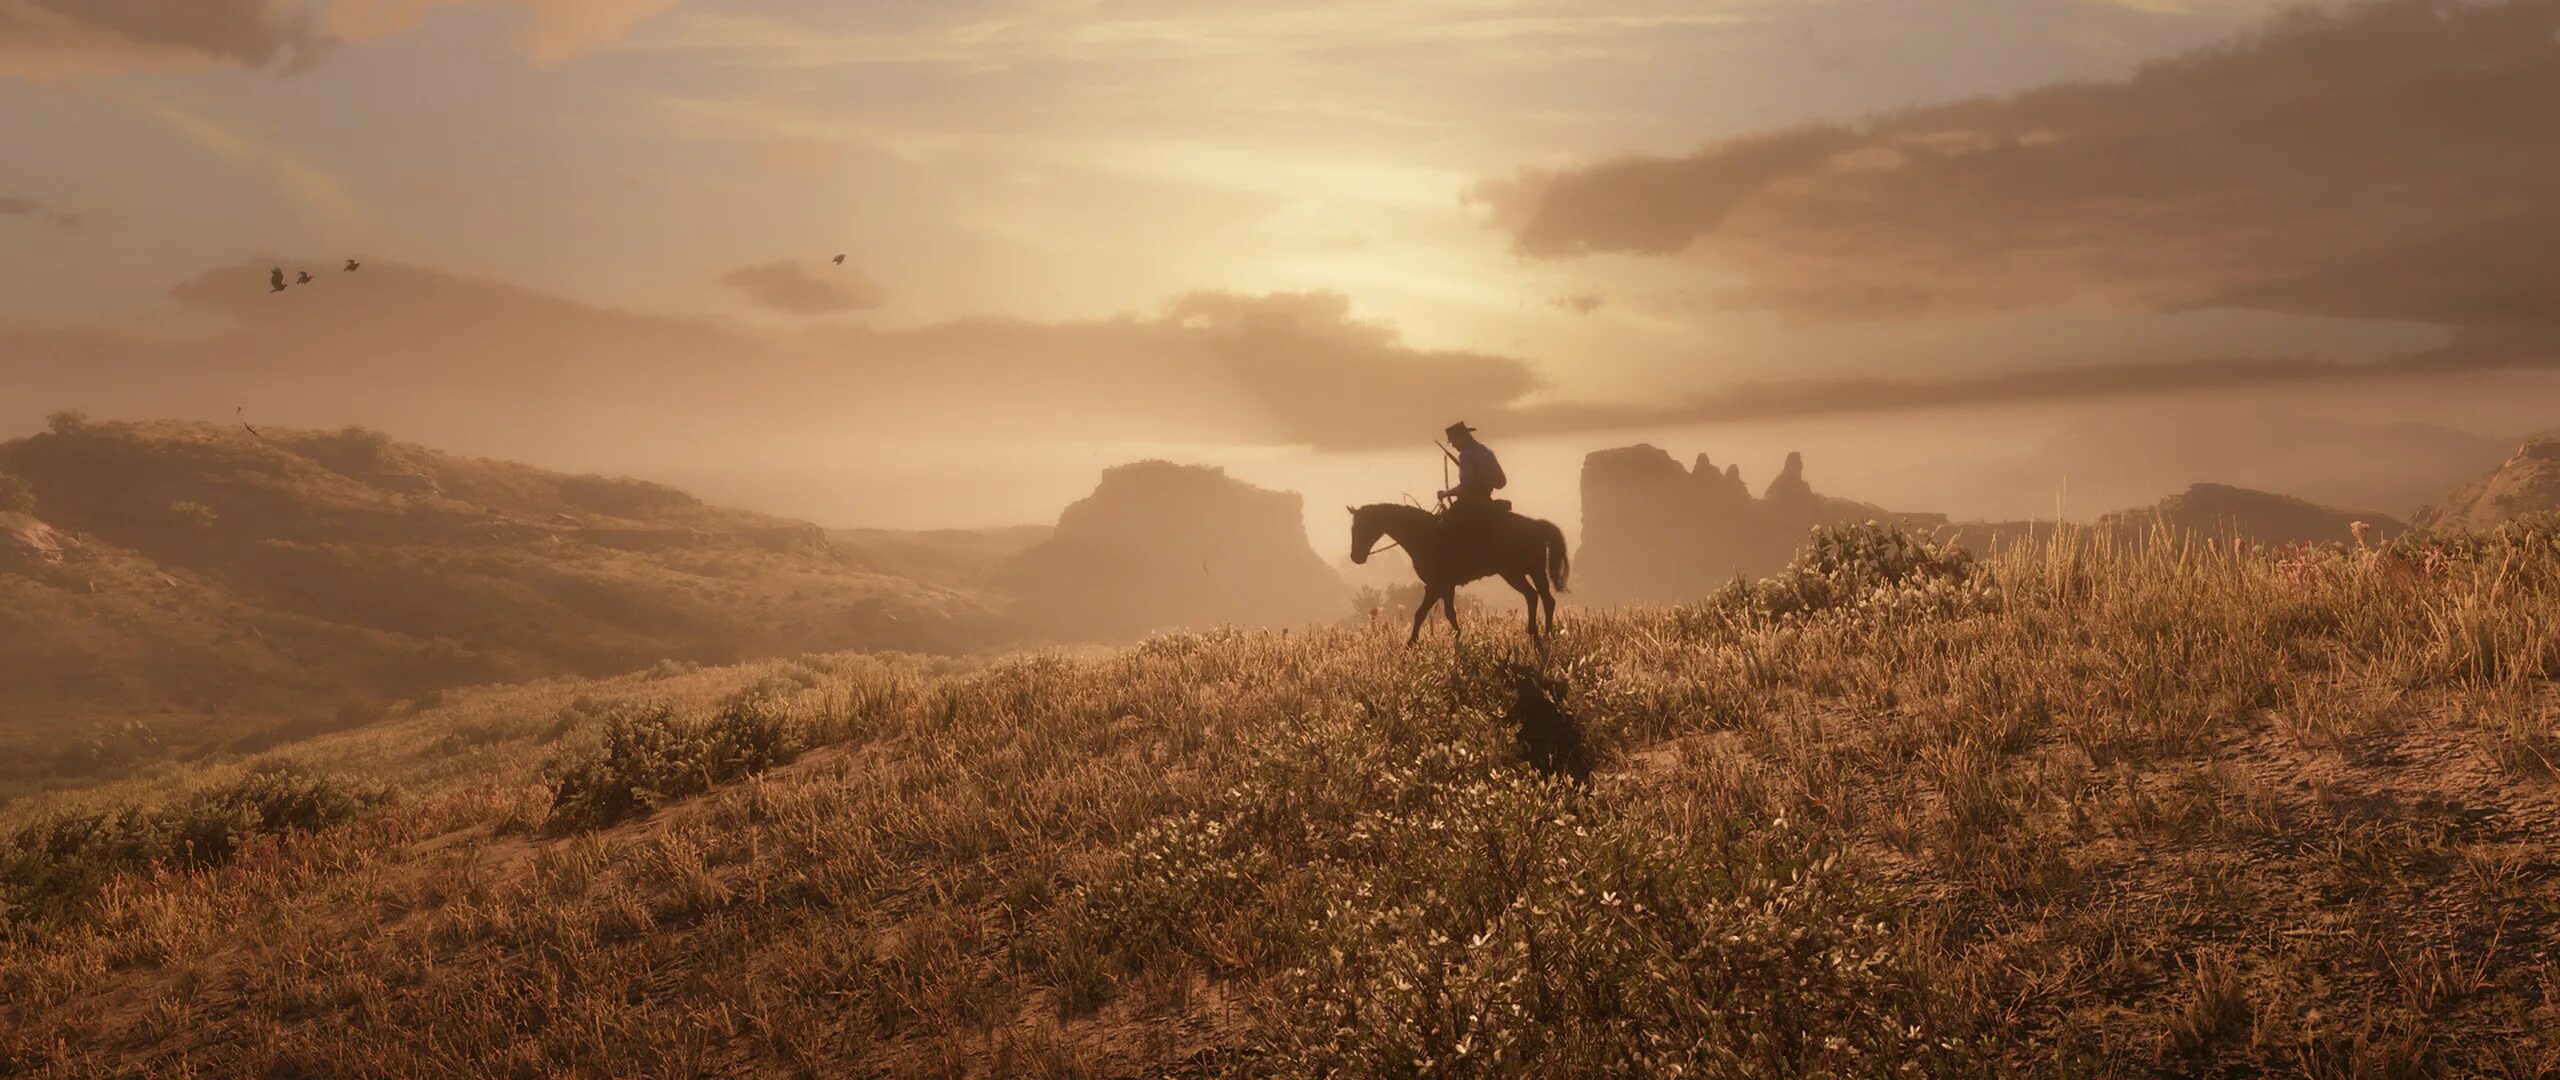 Red dead redemption 2 природа. Red Dead Redemption 2. Red Dead Redemption природа. Red Dead Redemption 2 обои.